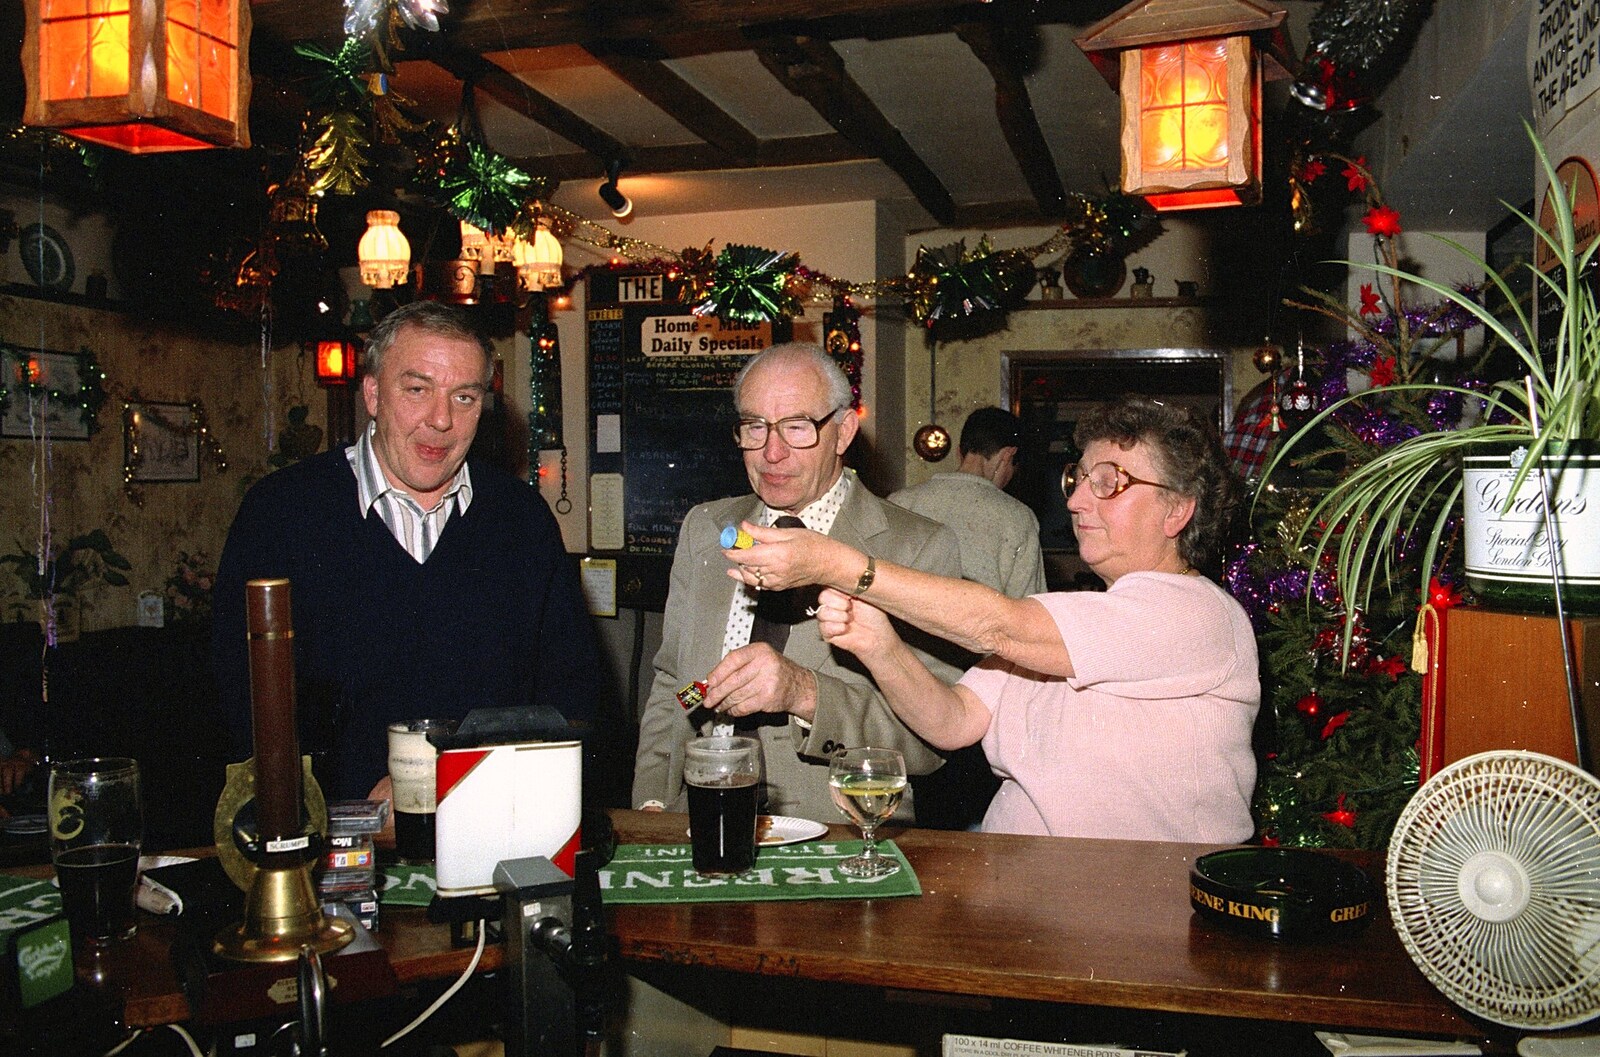 Geordie, John and Arline from New Year's Eve at the Swan Inn, Brome, Suffolk - 31st December 1994